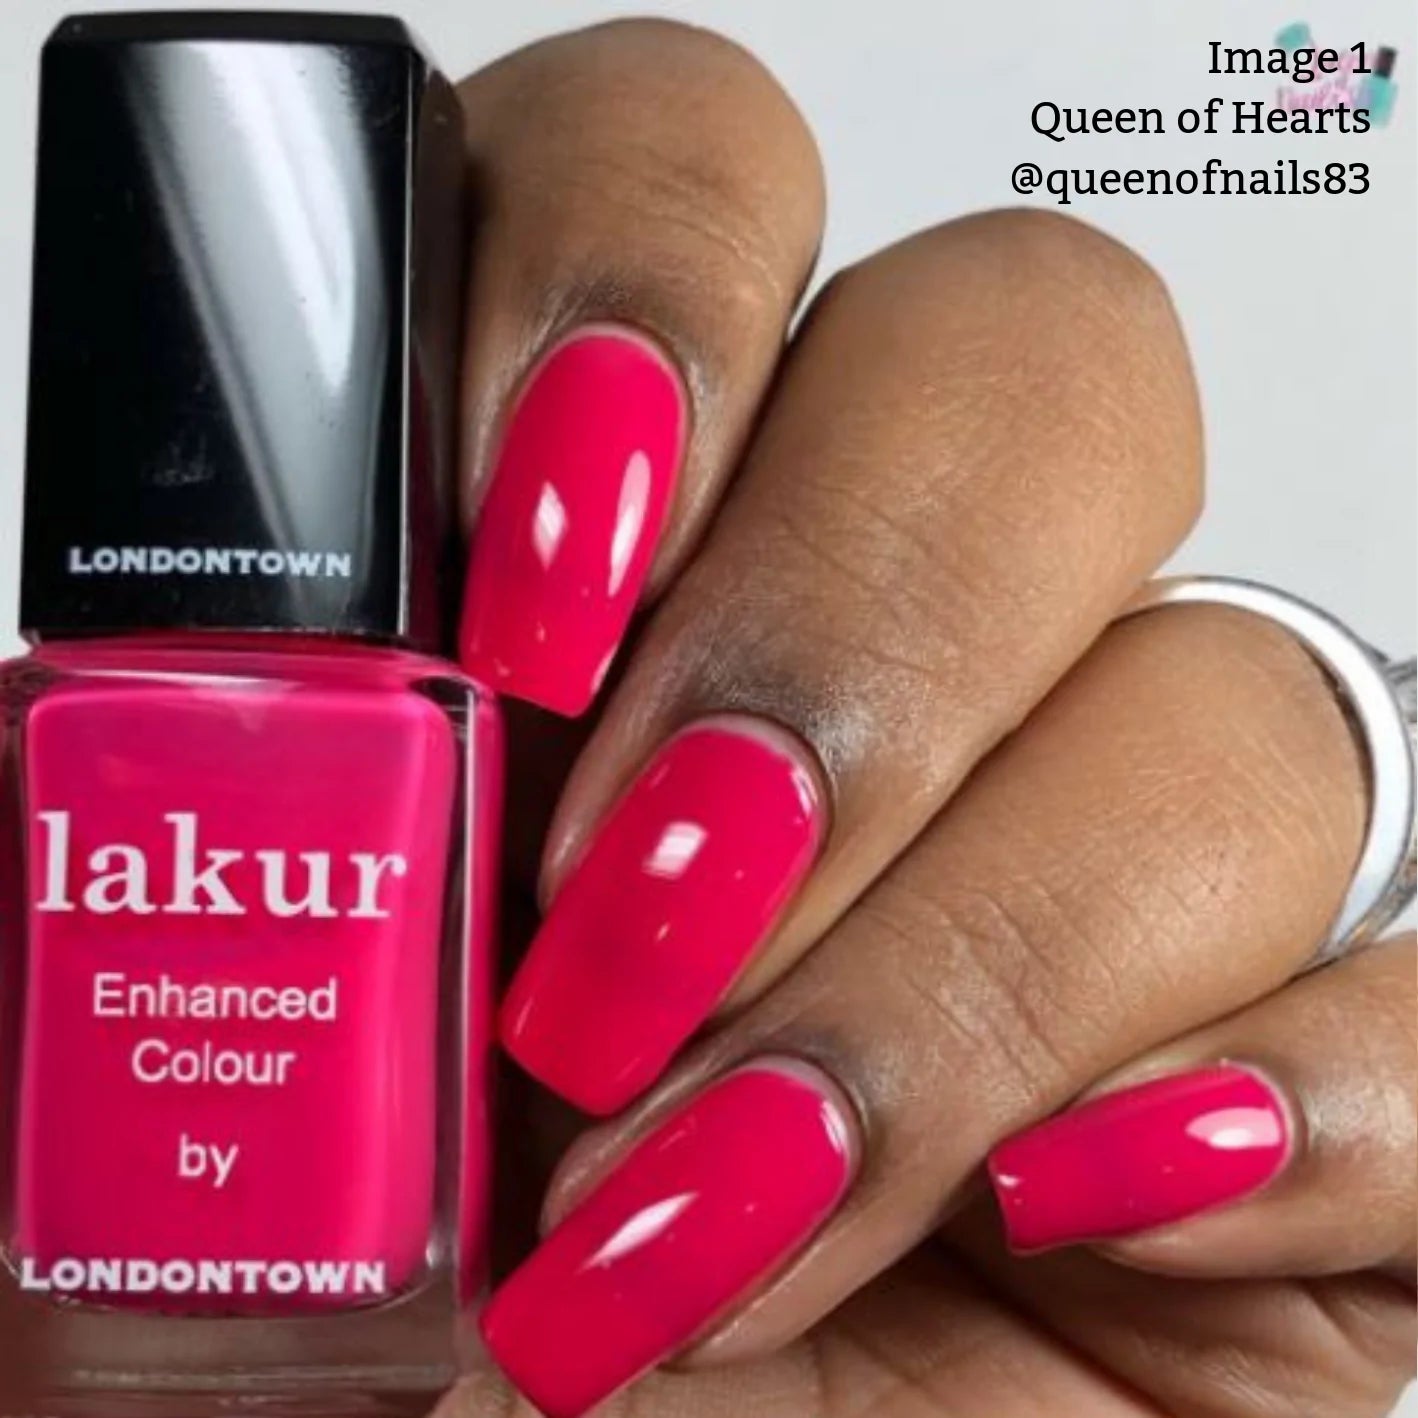  Queen of Hearts by LONDONTOWN LONDONTOWN Perfumarie